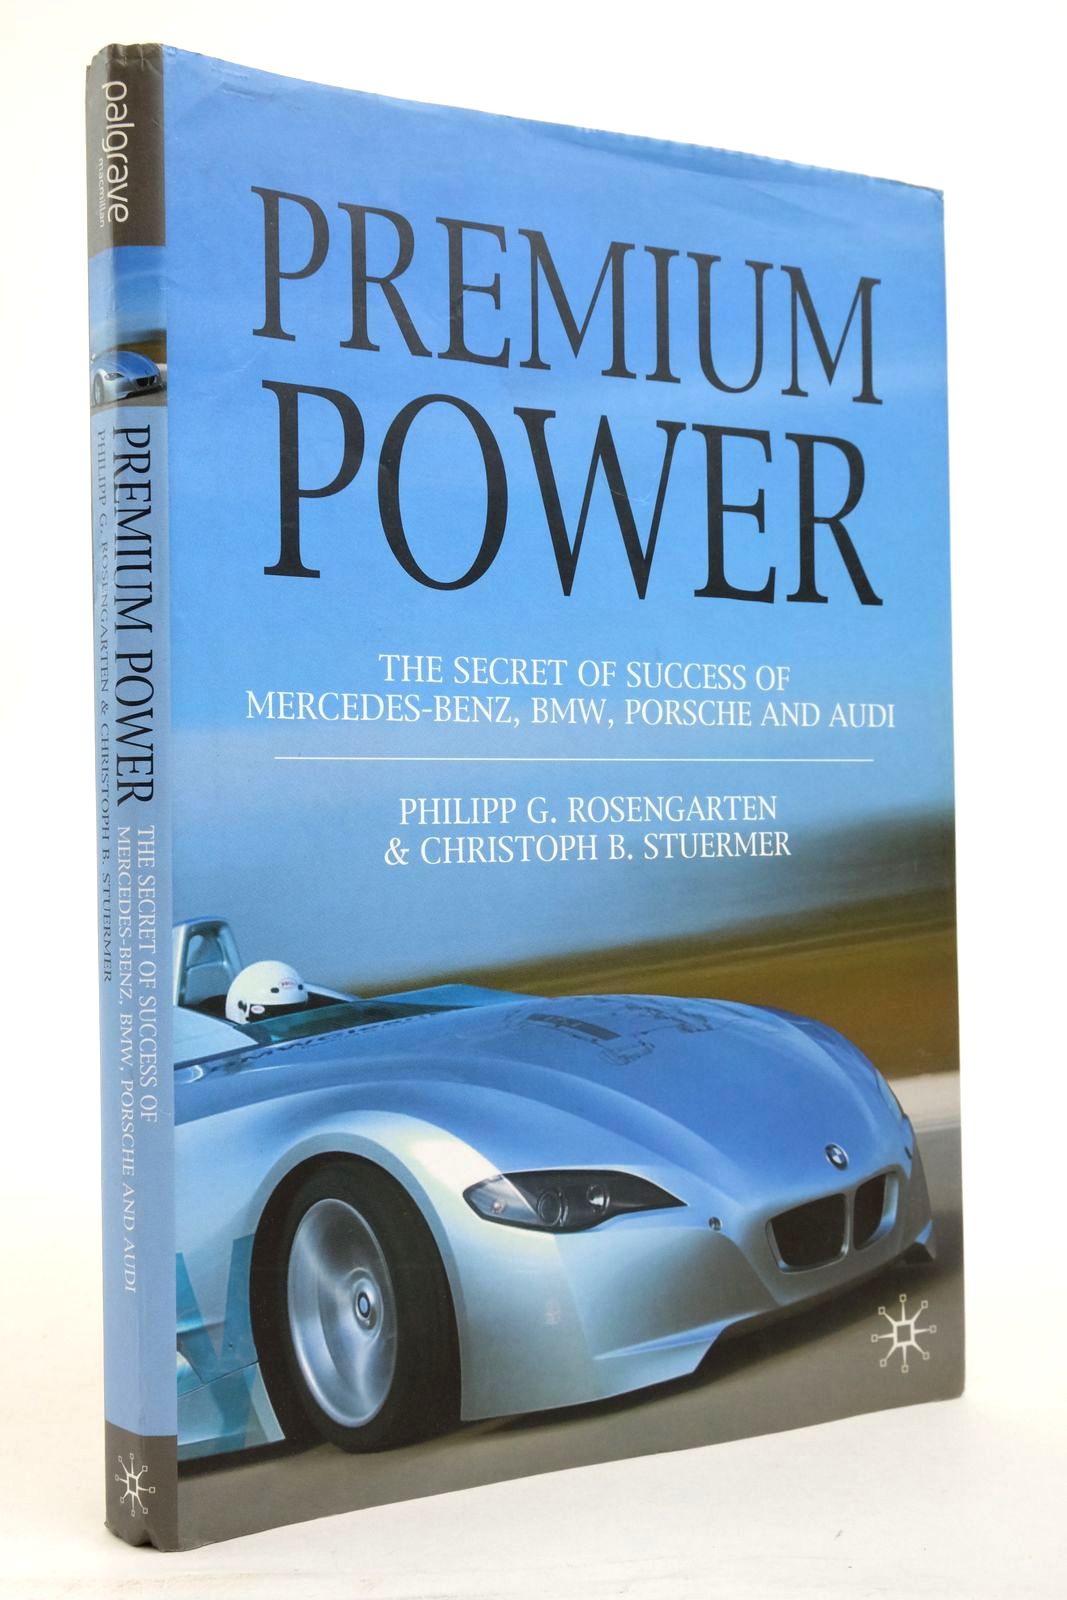 Photo of PREMIUM POWER: THE SECRET OF SUCCESS OF MERCEDES-BENZ, BMW, PORSCHE AND AUDI written by Rosengarten, Philipp G. Stuermer, Christoph B. published by Palgrave Macmillan (STOCK CODE: 2136769)  for sale by Stella & Rose's Books